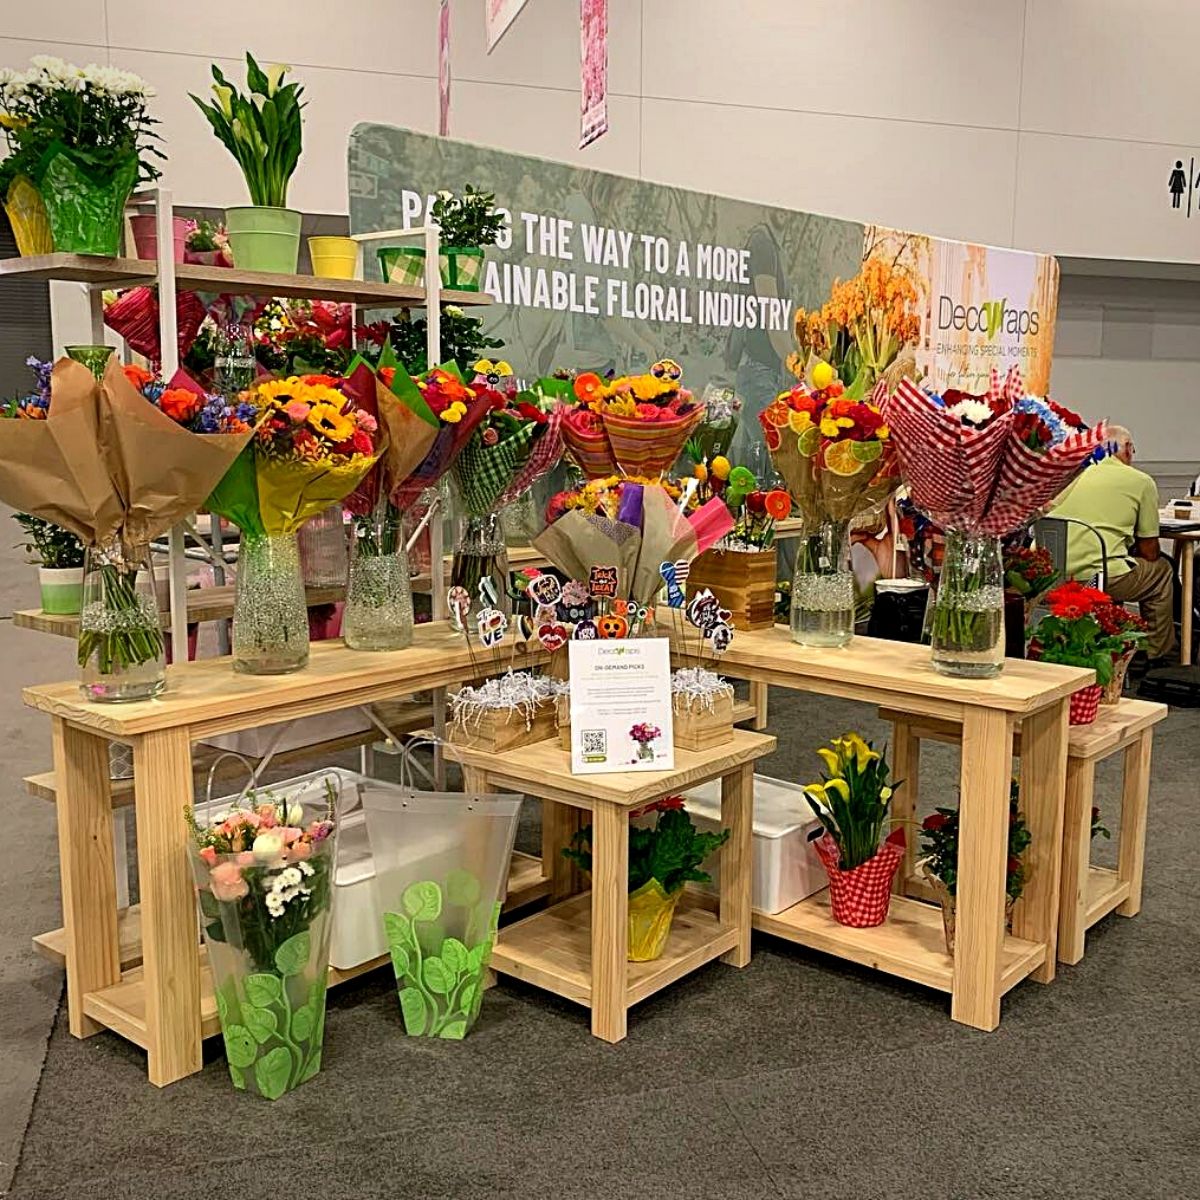 ​Floriexpo 2024 North America’s Largest B2B Event Exclusively for Floral Industry